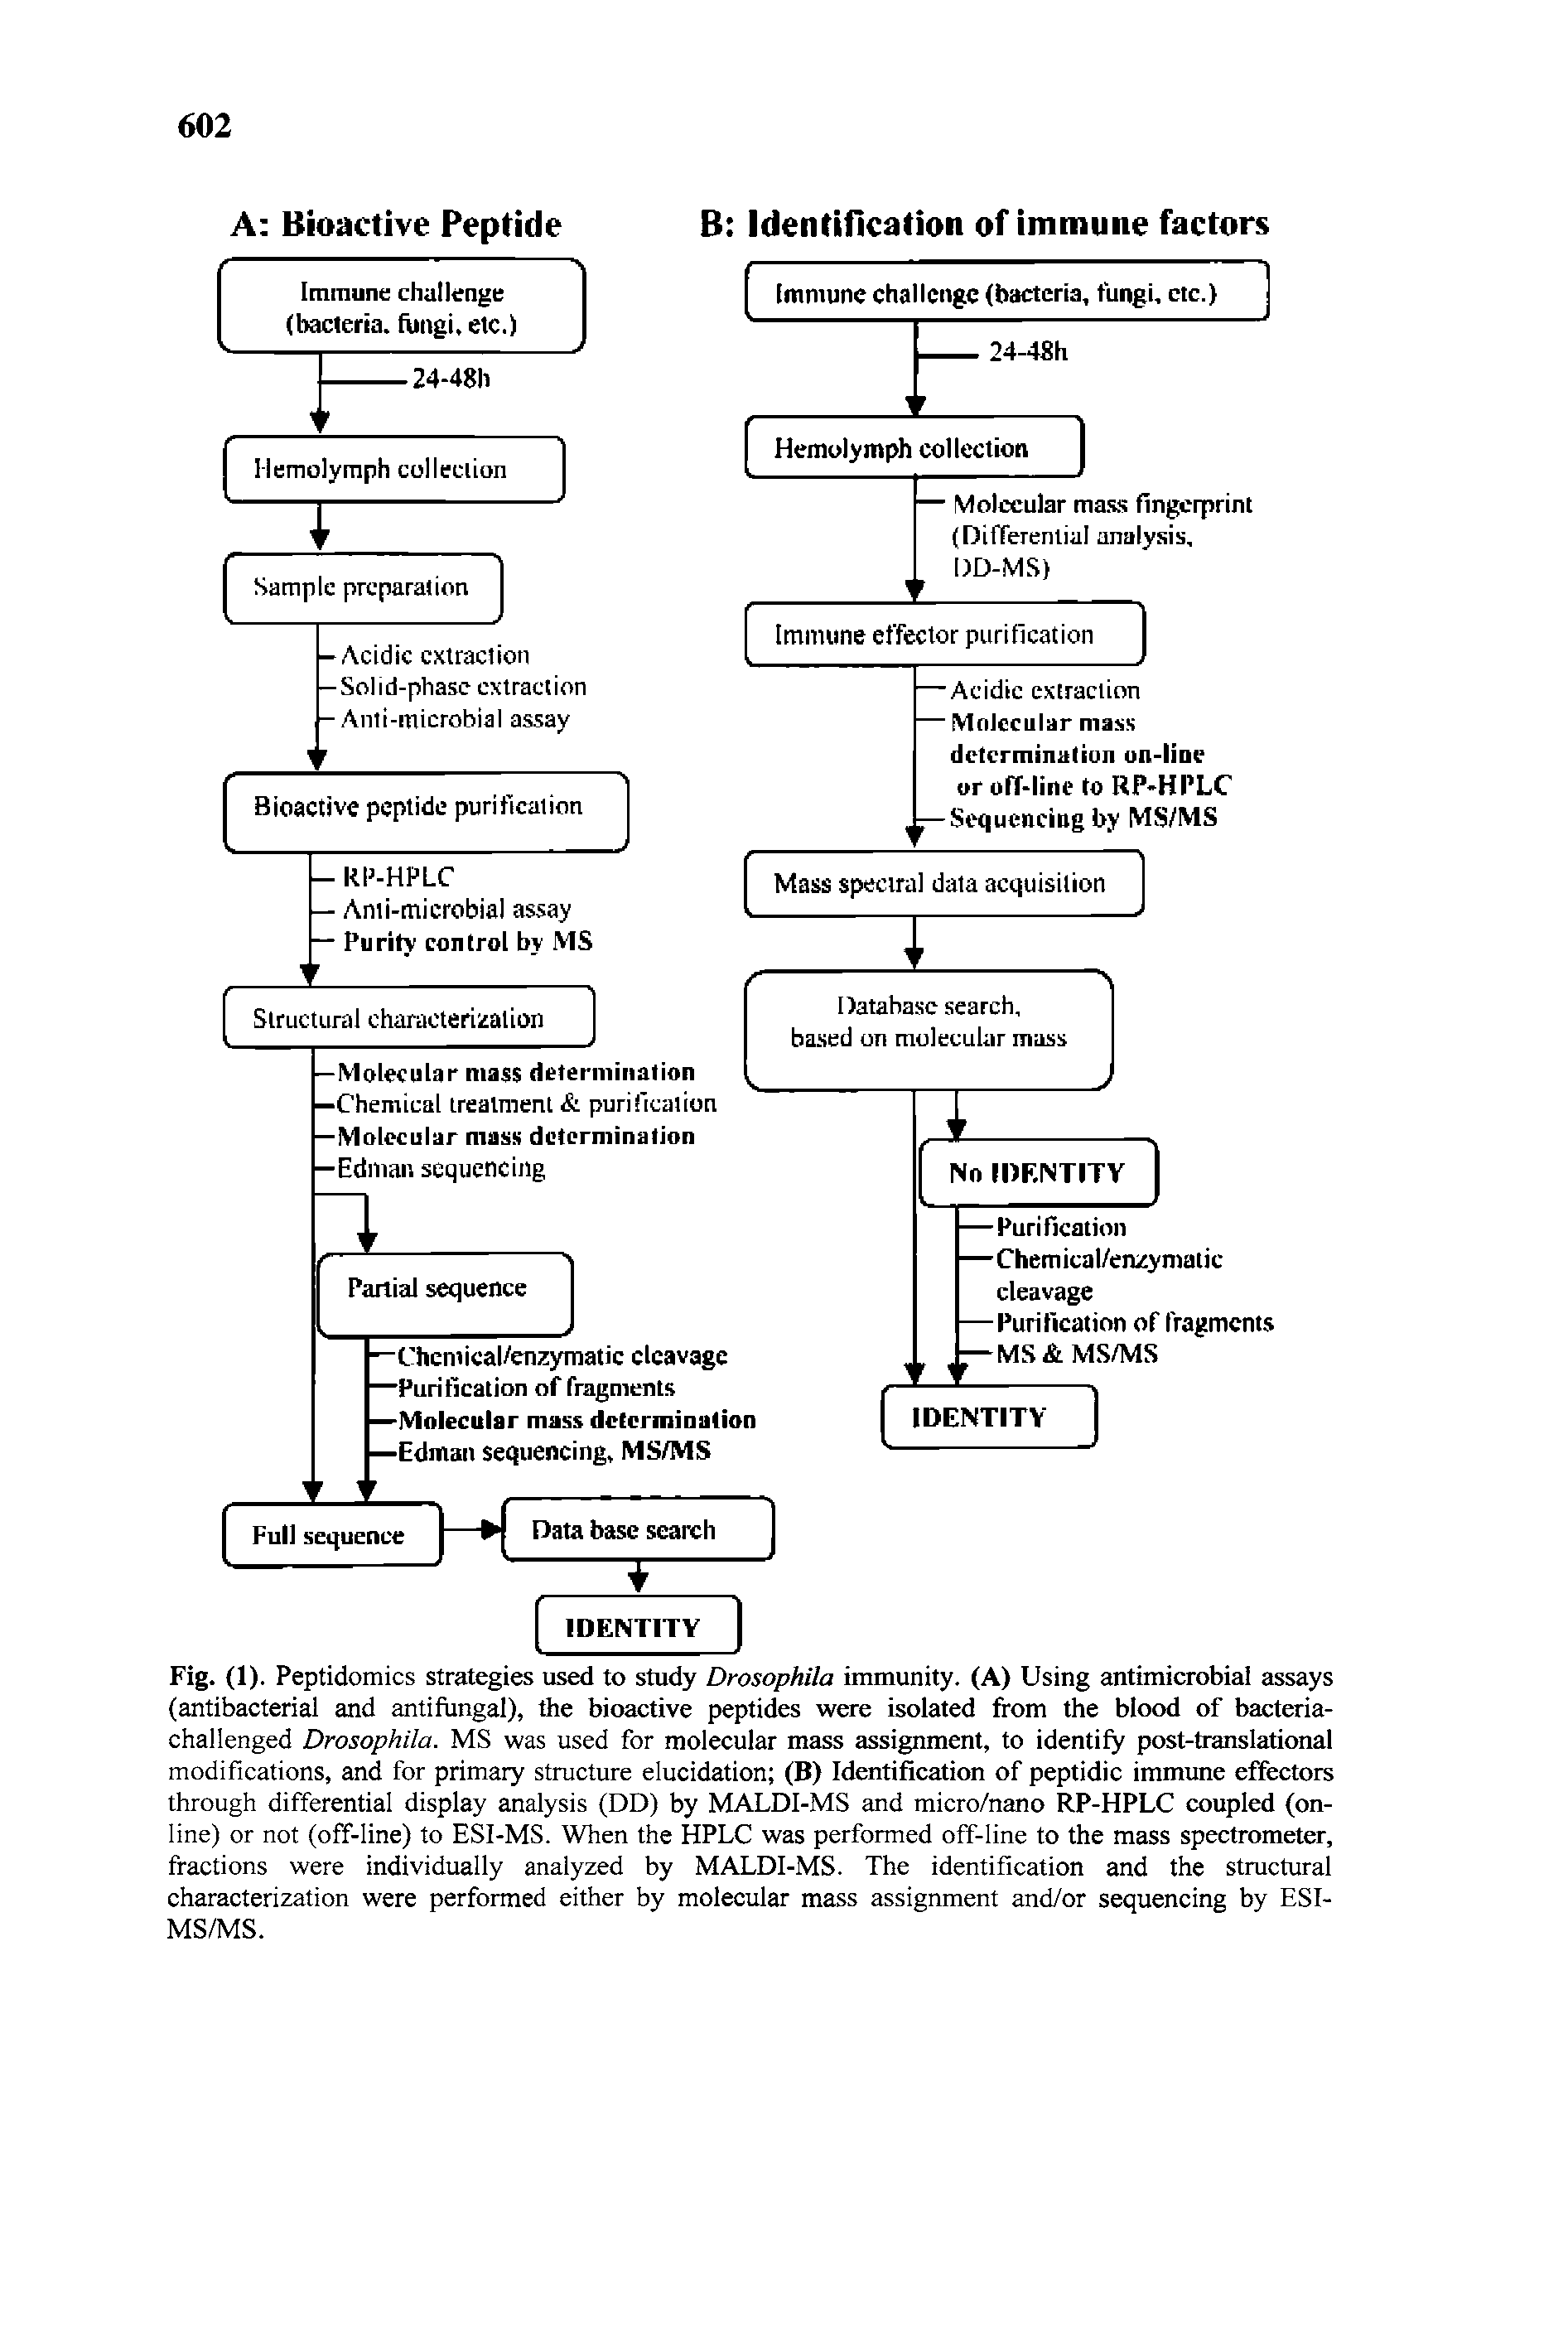 Fig. (1). Peptidomics strategies used to study Drosophila immunity. (A) Using antimicrobial assays (antibacterial and antifungal), the bioactive peptides were isolated from the blood of bacteria-challenged Drosophila. MS was used for molecular mass assignment, to identify post-translational modifications, and for primary structure elucidation (B) Identification of peptidic immune effectors through differential display analysis (DD) by MALDI-MS and micro/nano RP-HPLC coupled (online) or not (off-line) to ESI-MS. When the HPLC was performed off-line to the mass spectrometer, fractions were individually analyzed by MALDI-MS. The identification and the structural characterization were performed either by molecular mass assignment and/or sequencing by ESI-MS/MS.